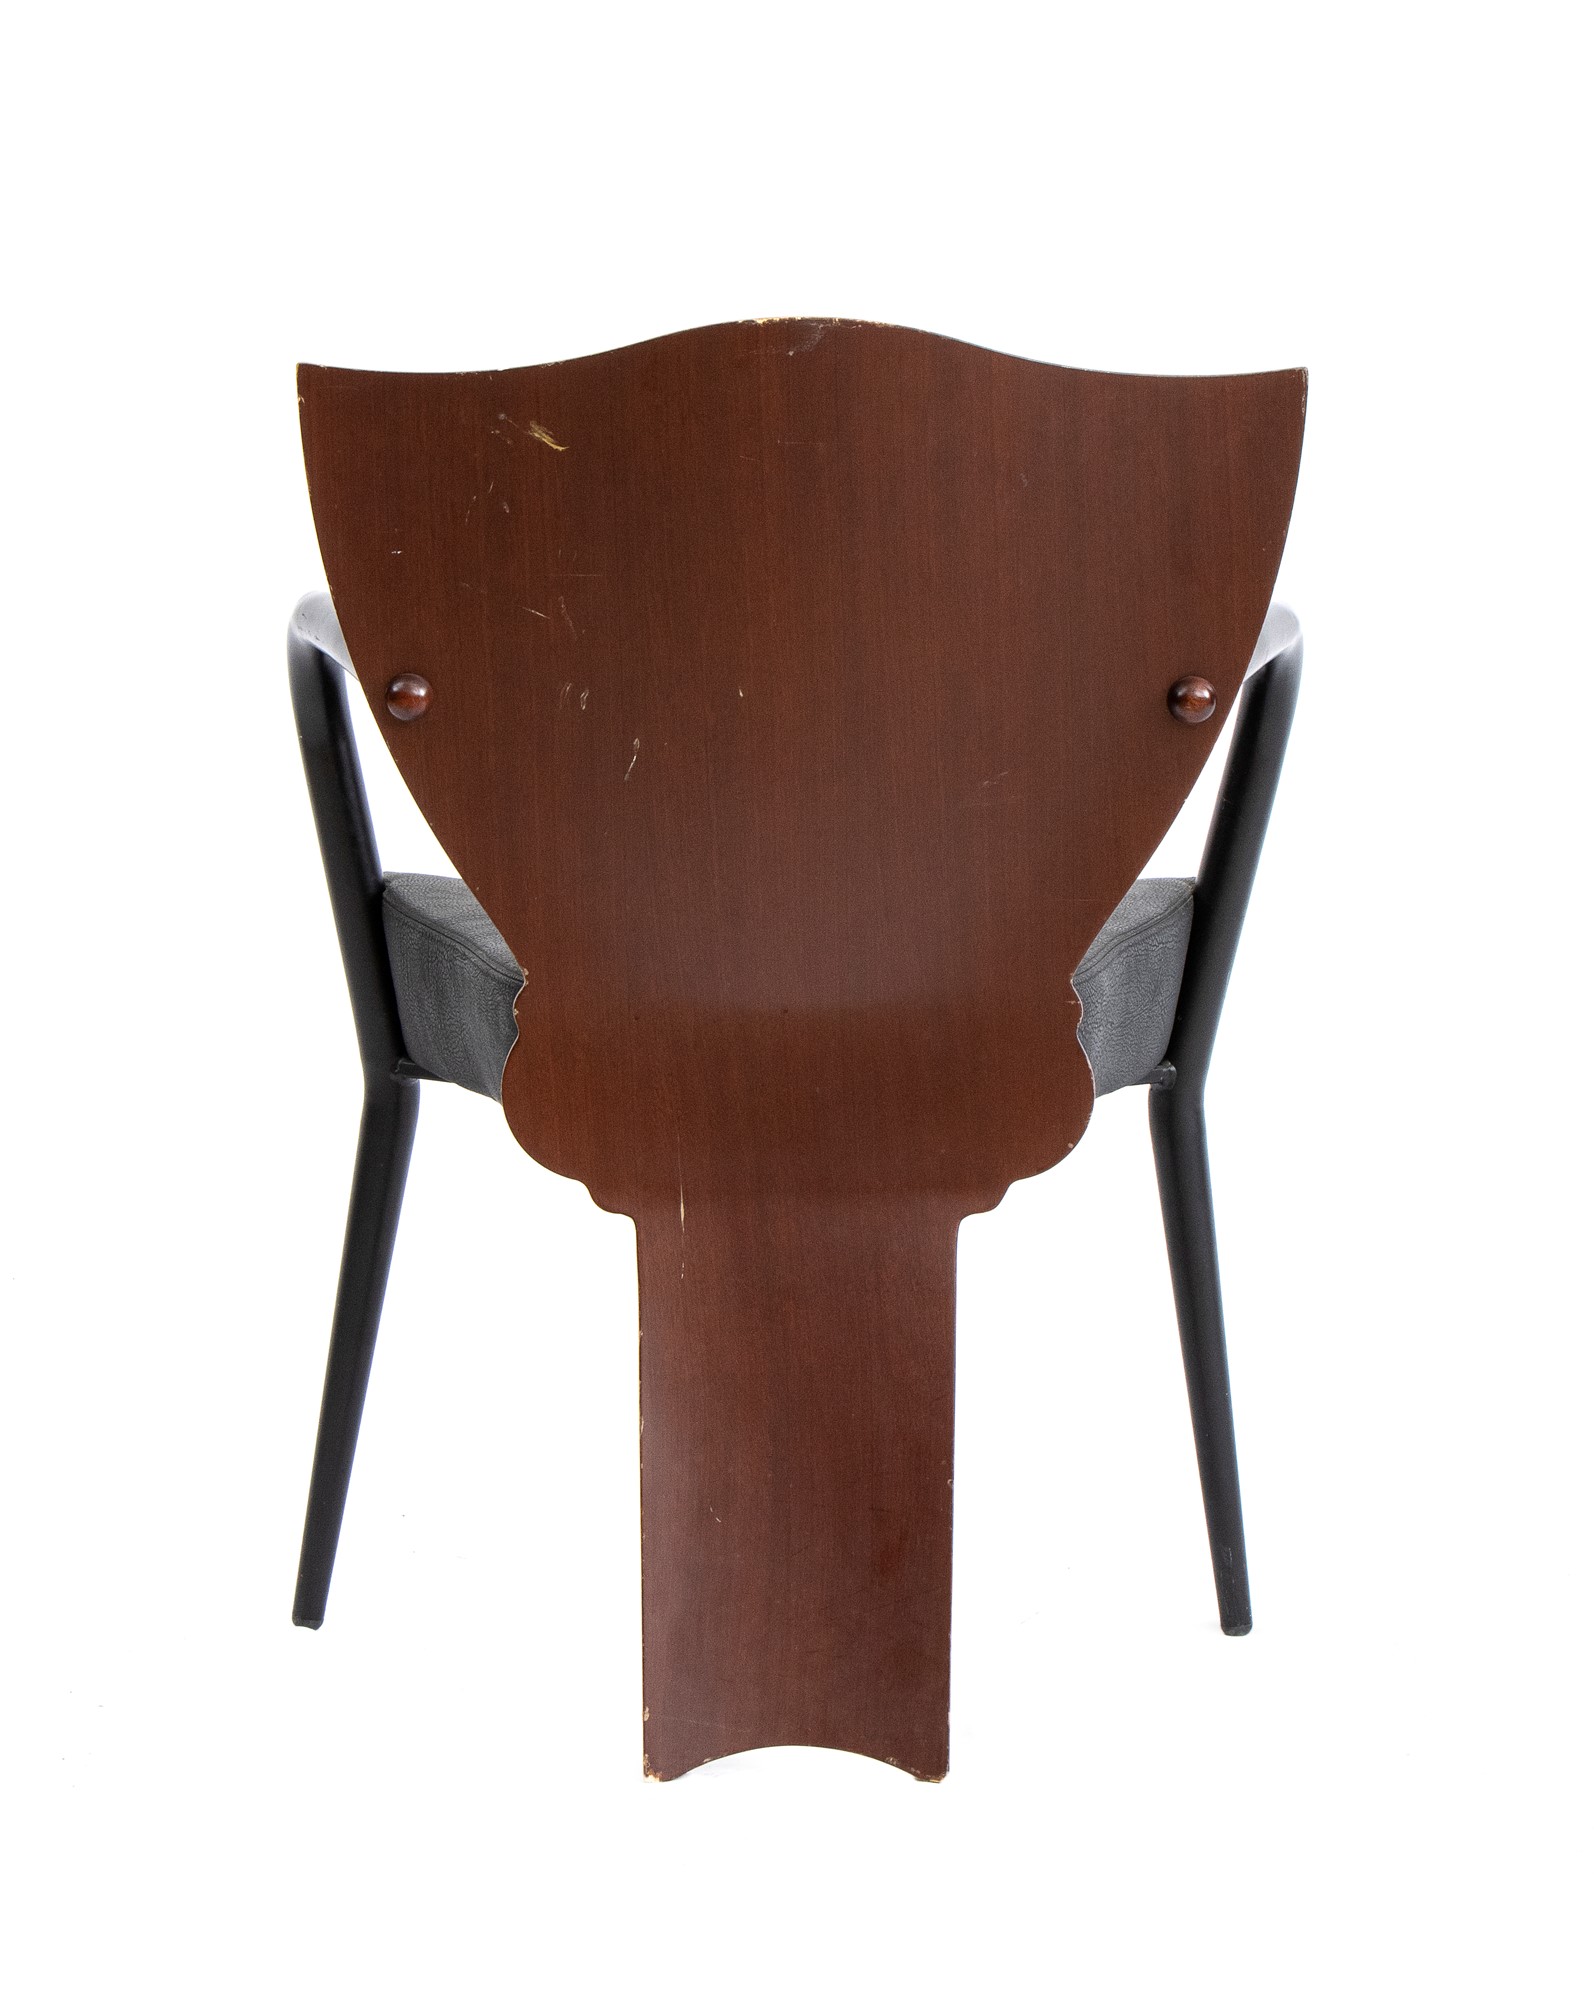 Four chairs mod. Dalami - Image 9 of 15